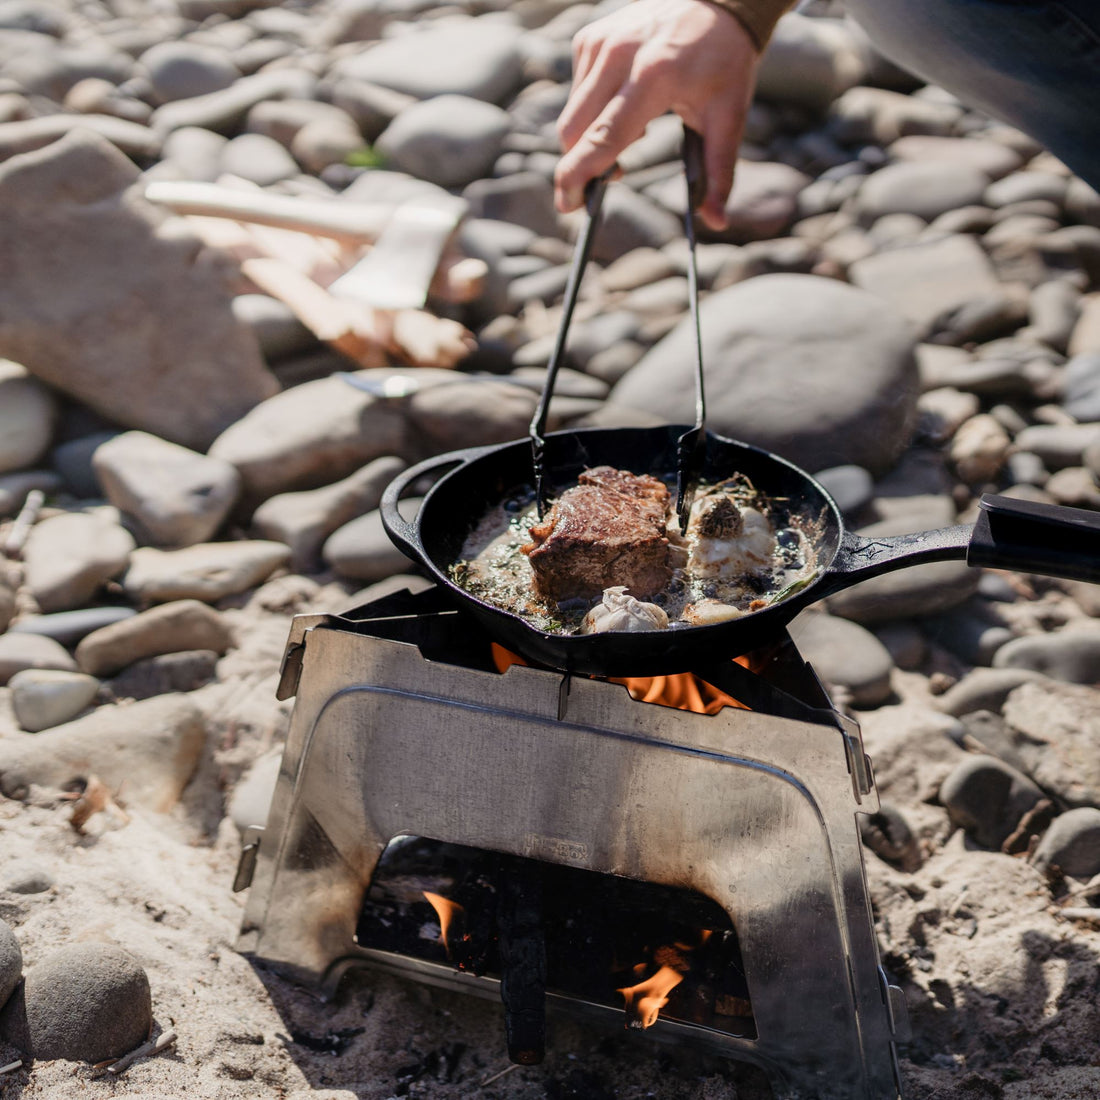 How to Care for Your Griddle by Camp Chef  Cooking stone, Griddle recipes,  Campfire food